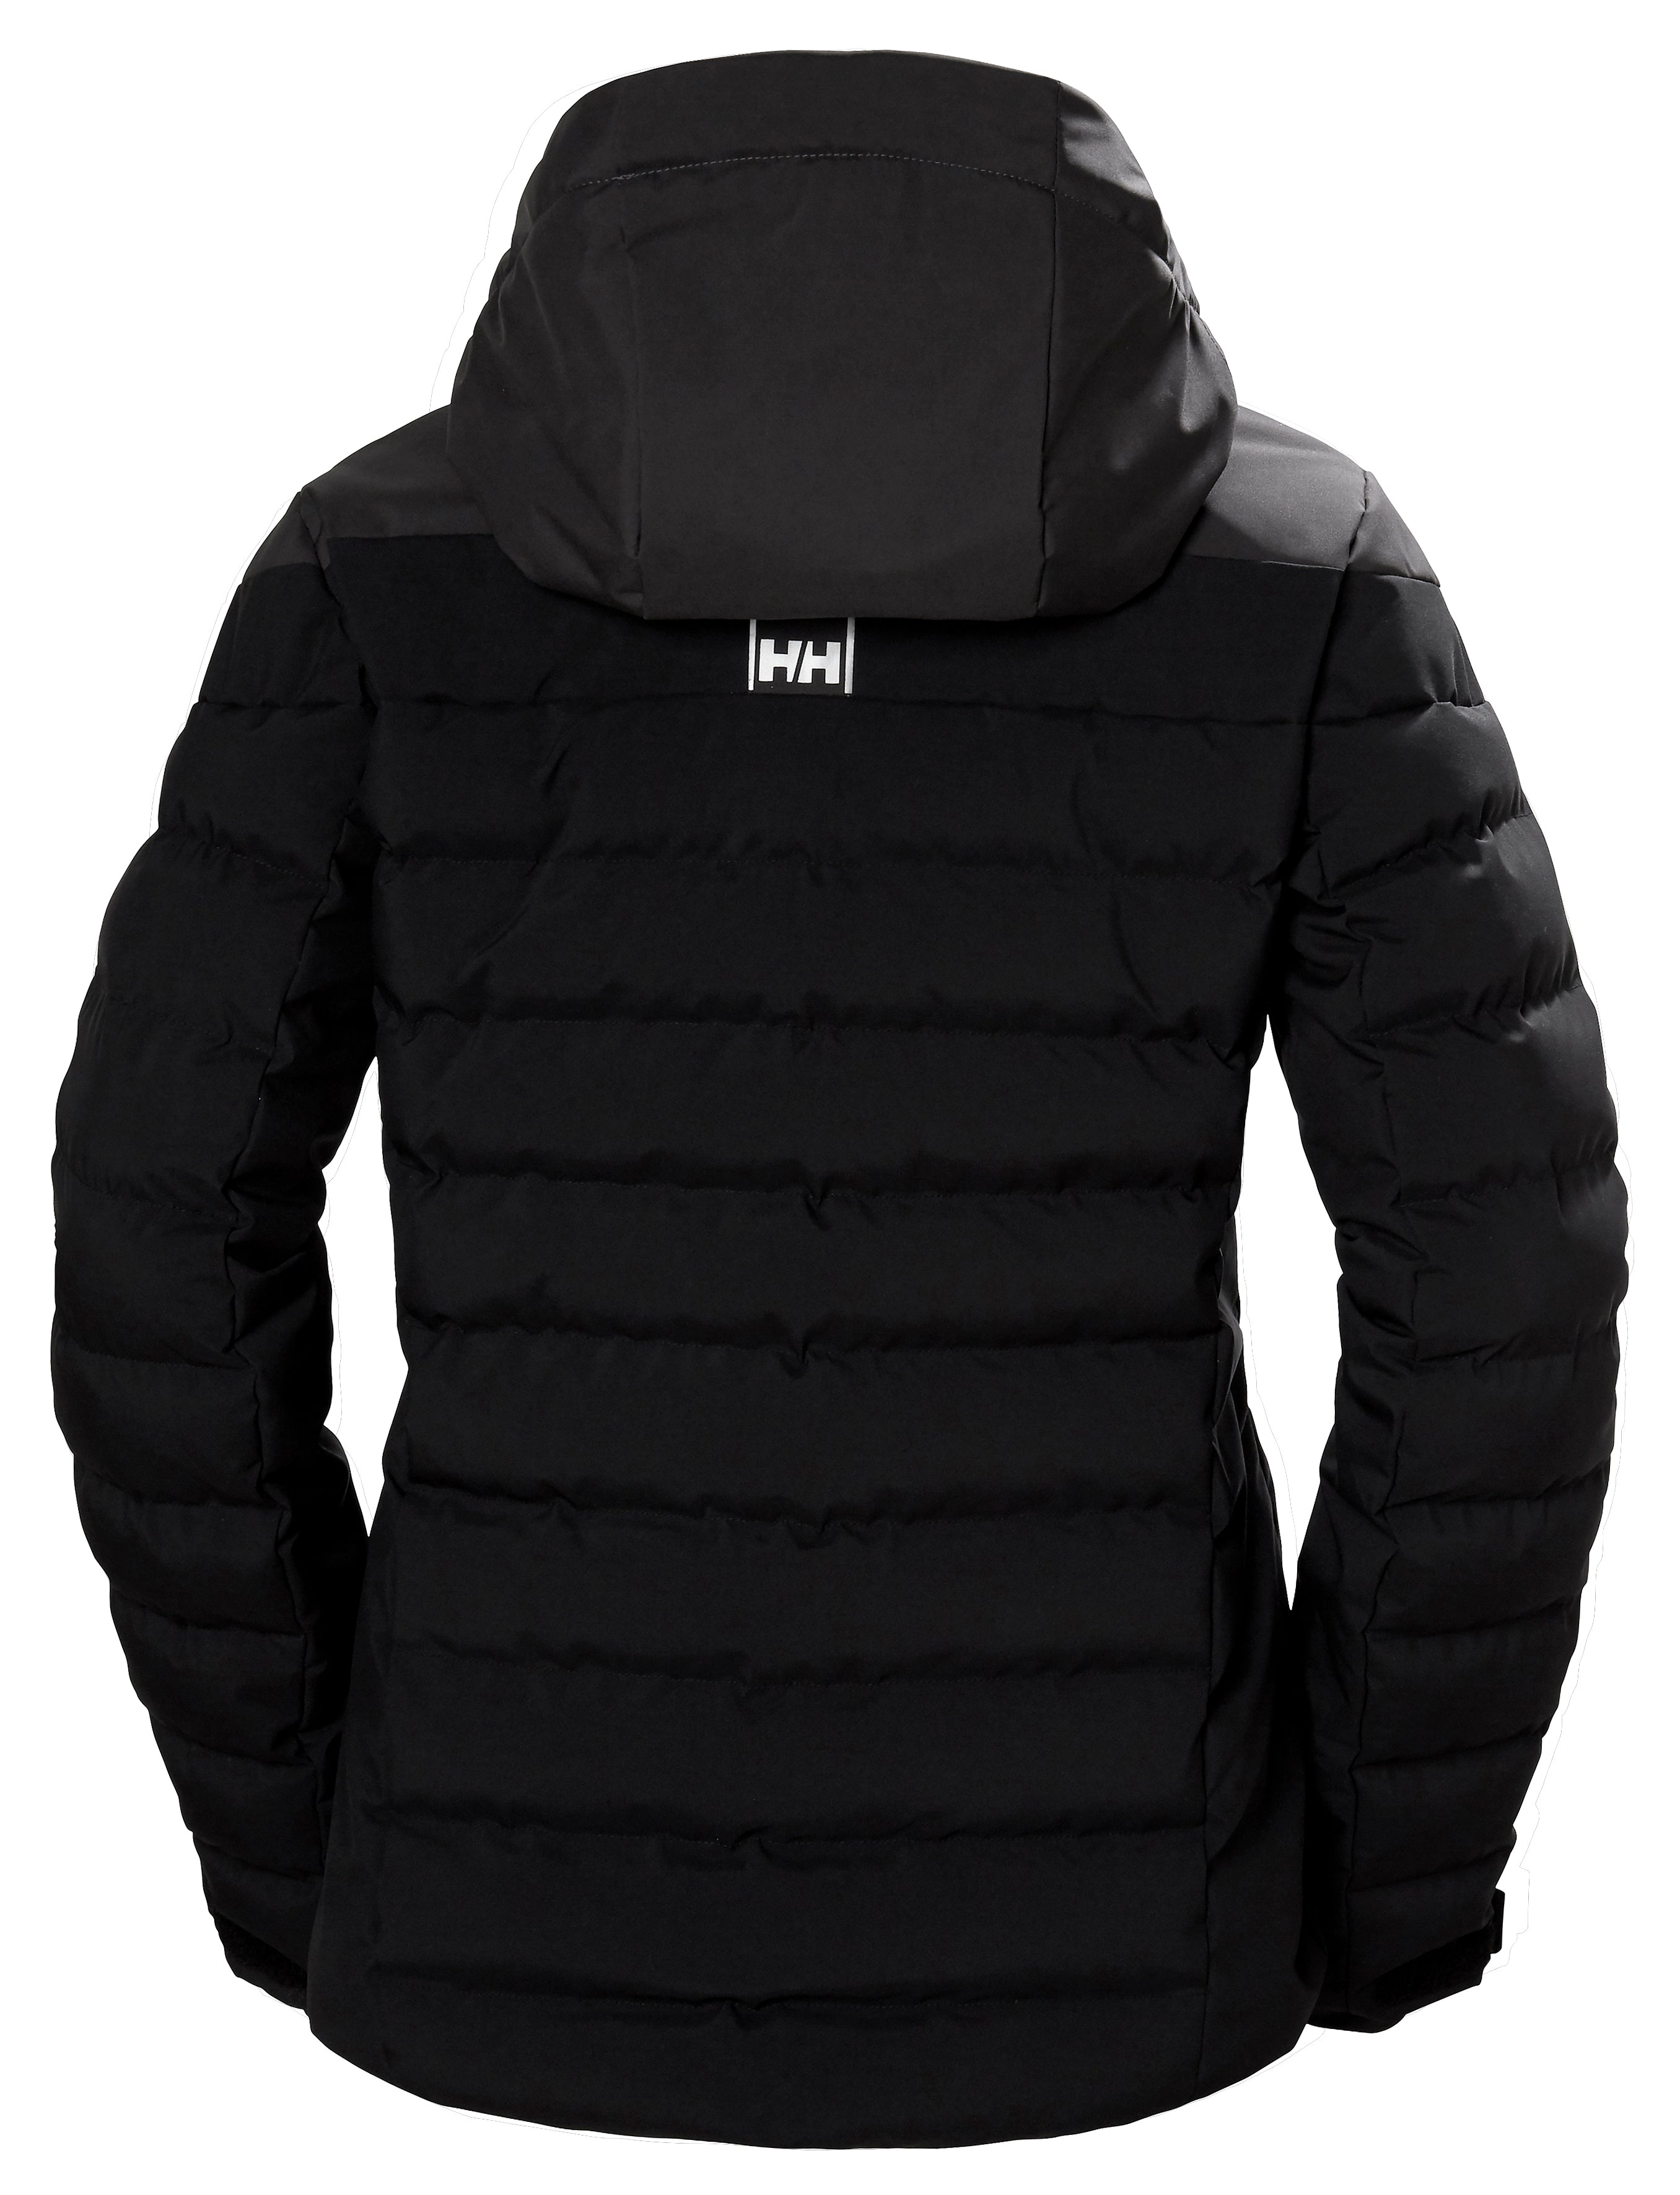 Imperial Puffy Ski Jacket for Women